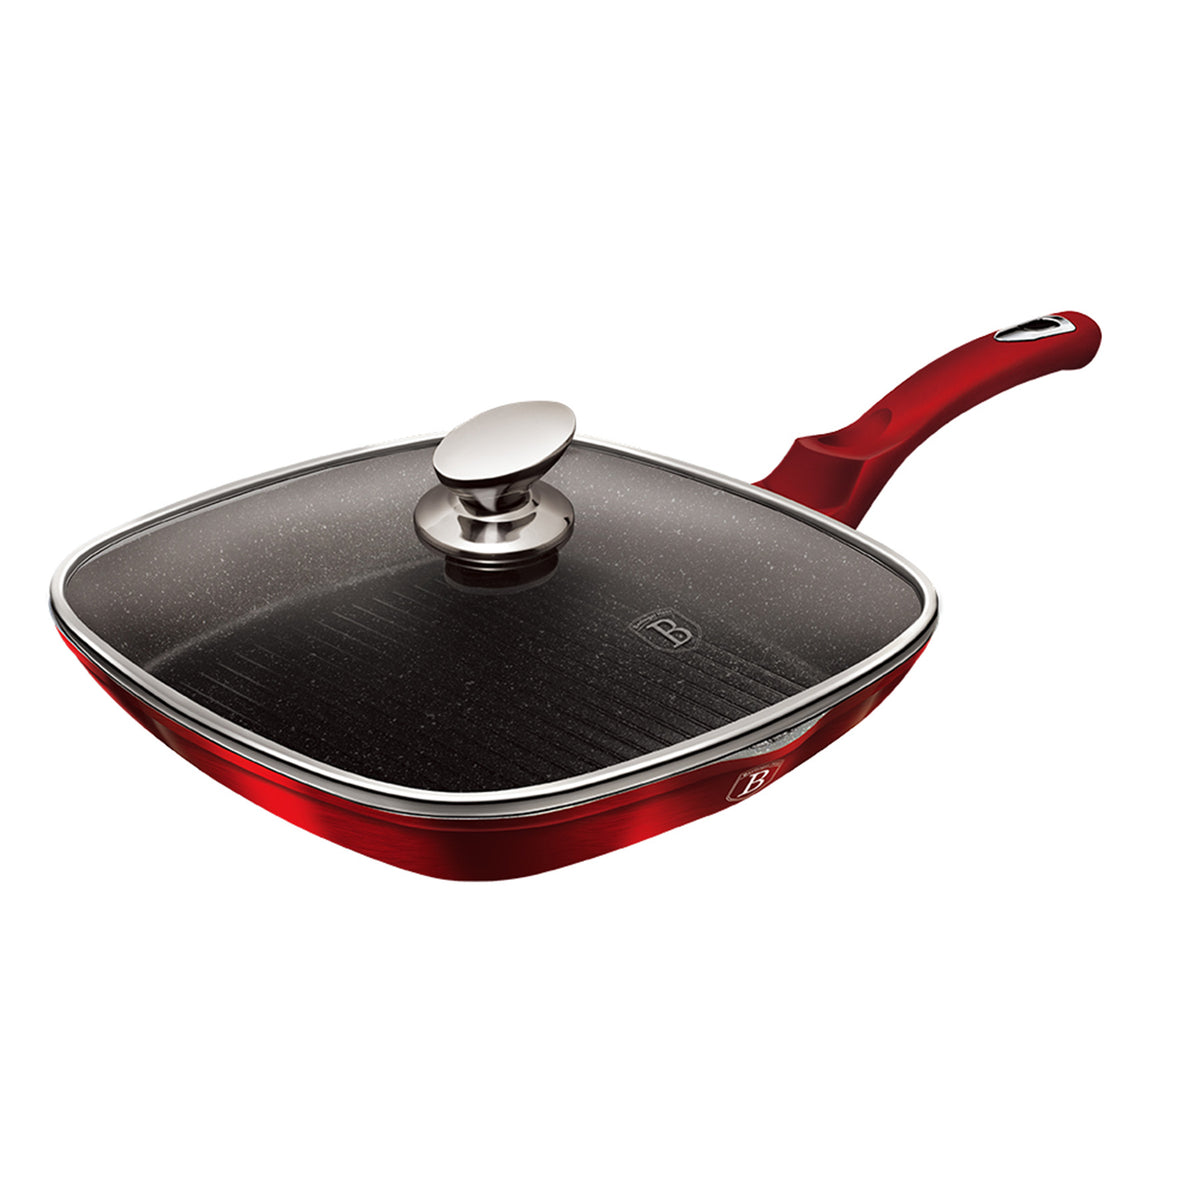 Grill pan with glass lid